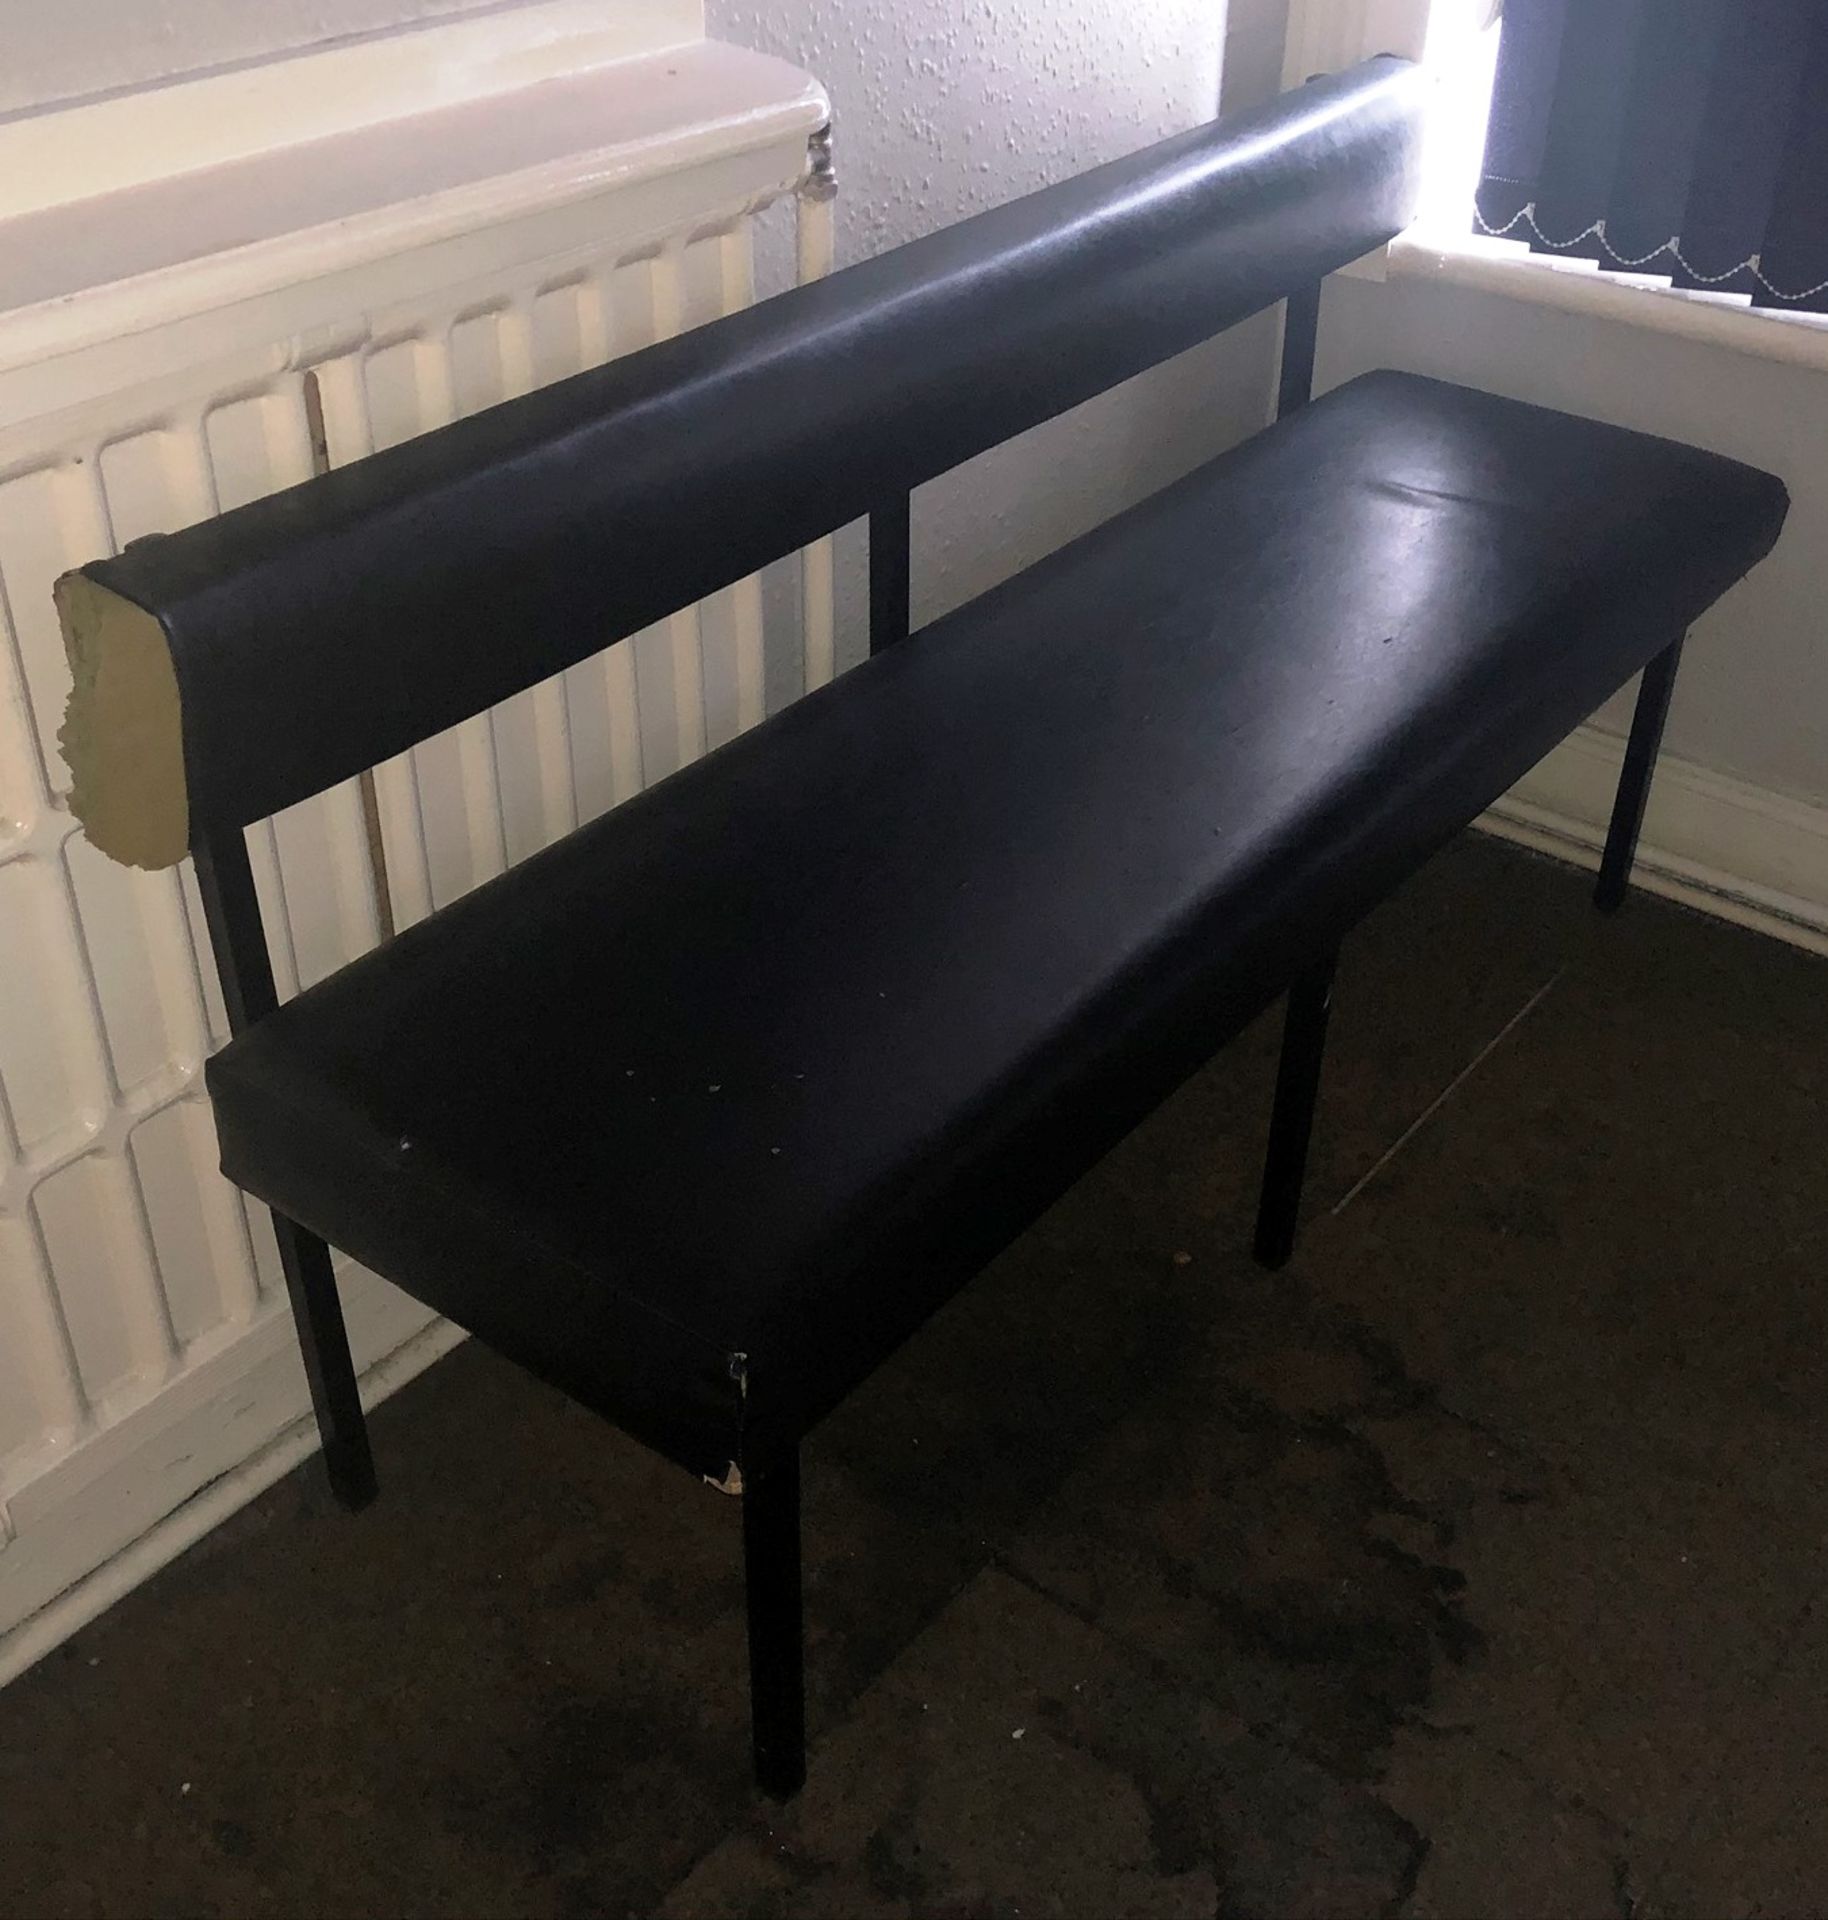 6 x Faux Leather Benches in Black - Image 4 of 5